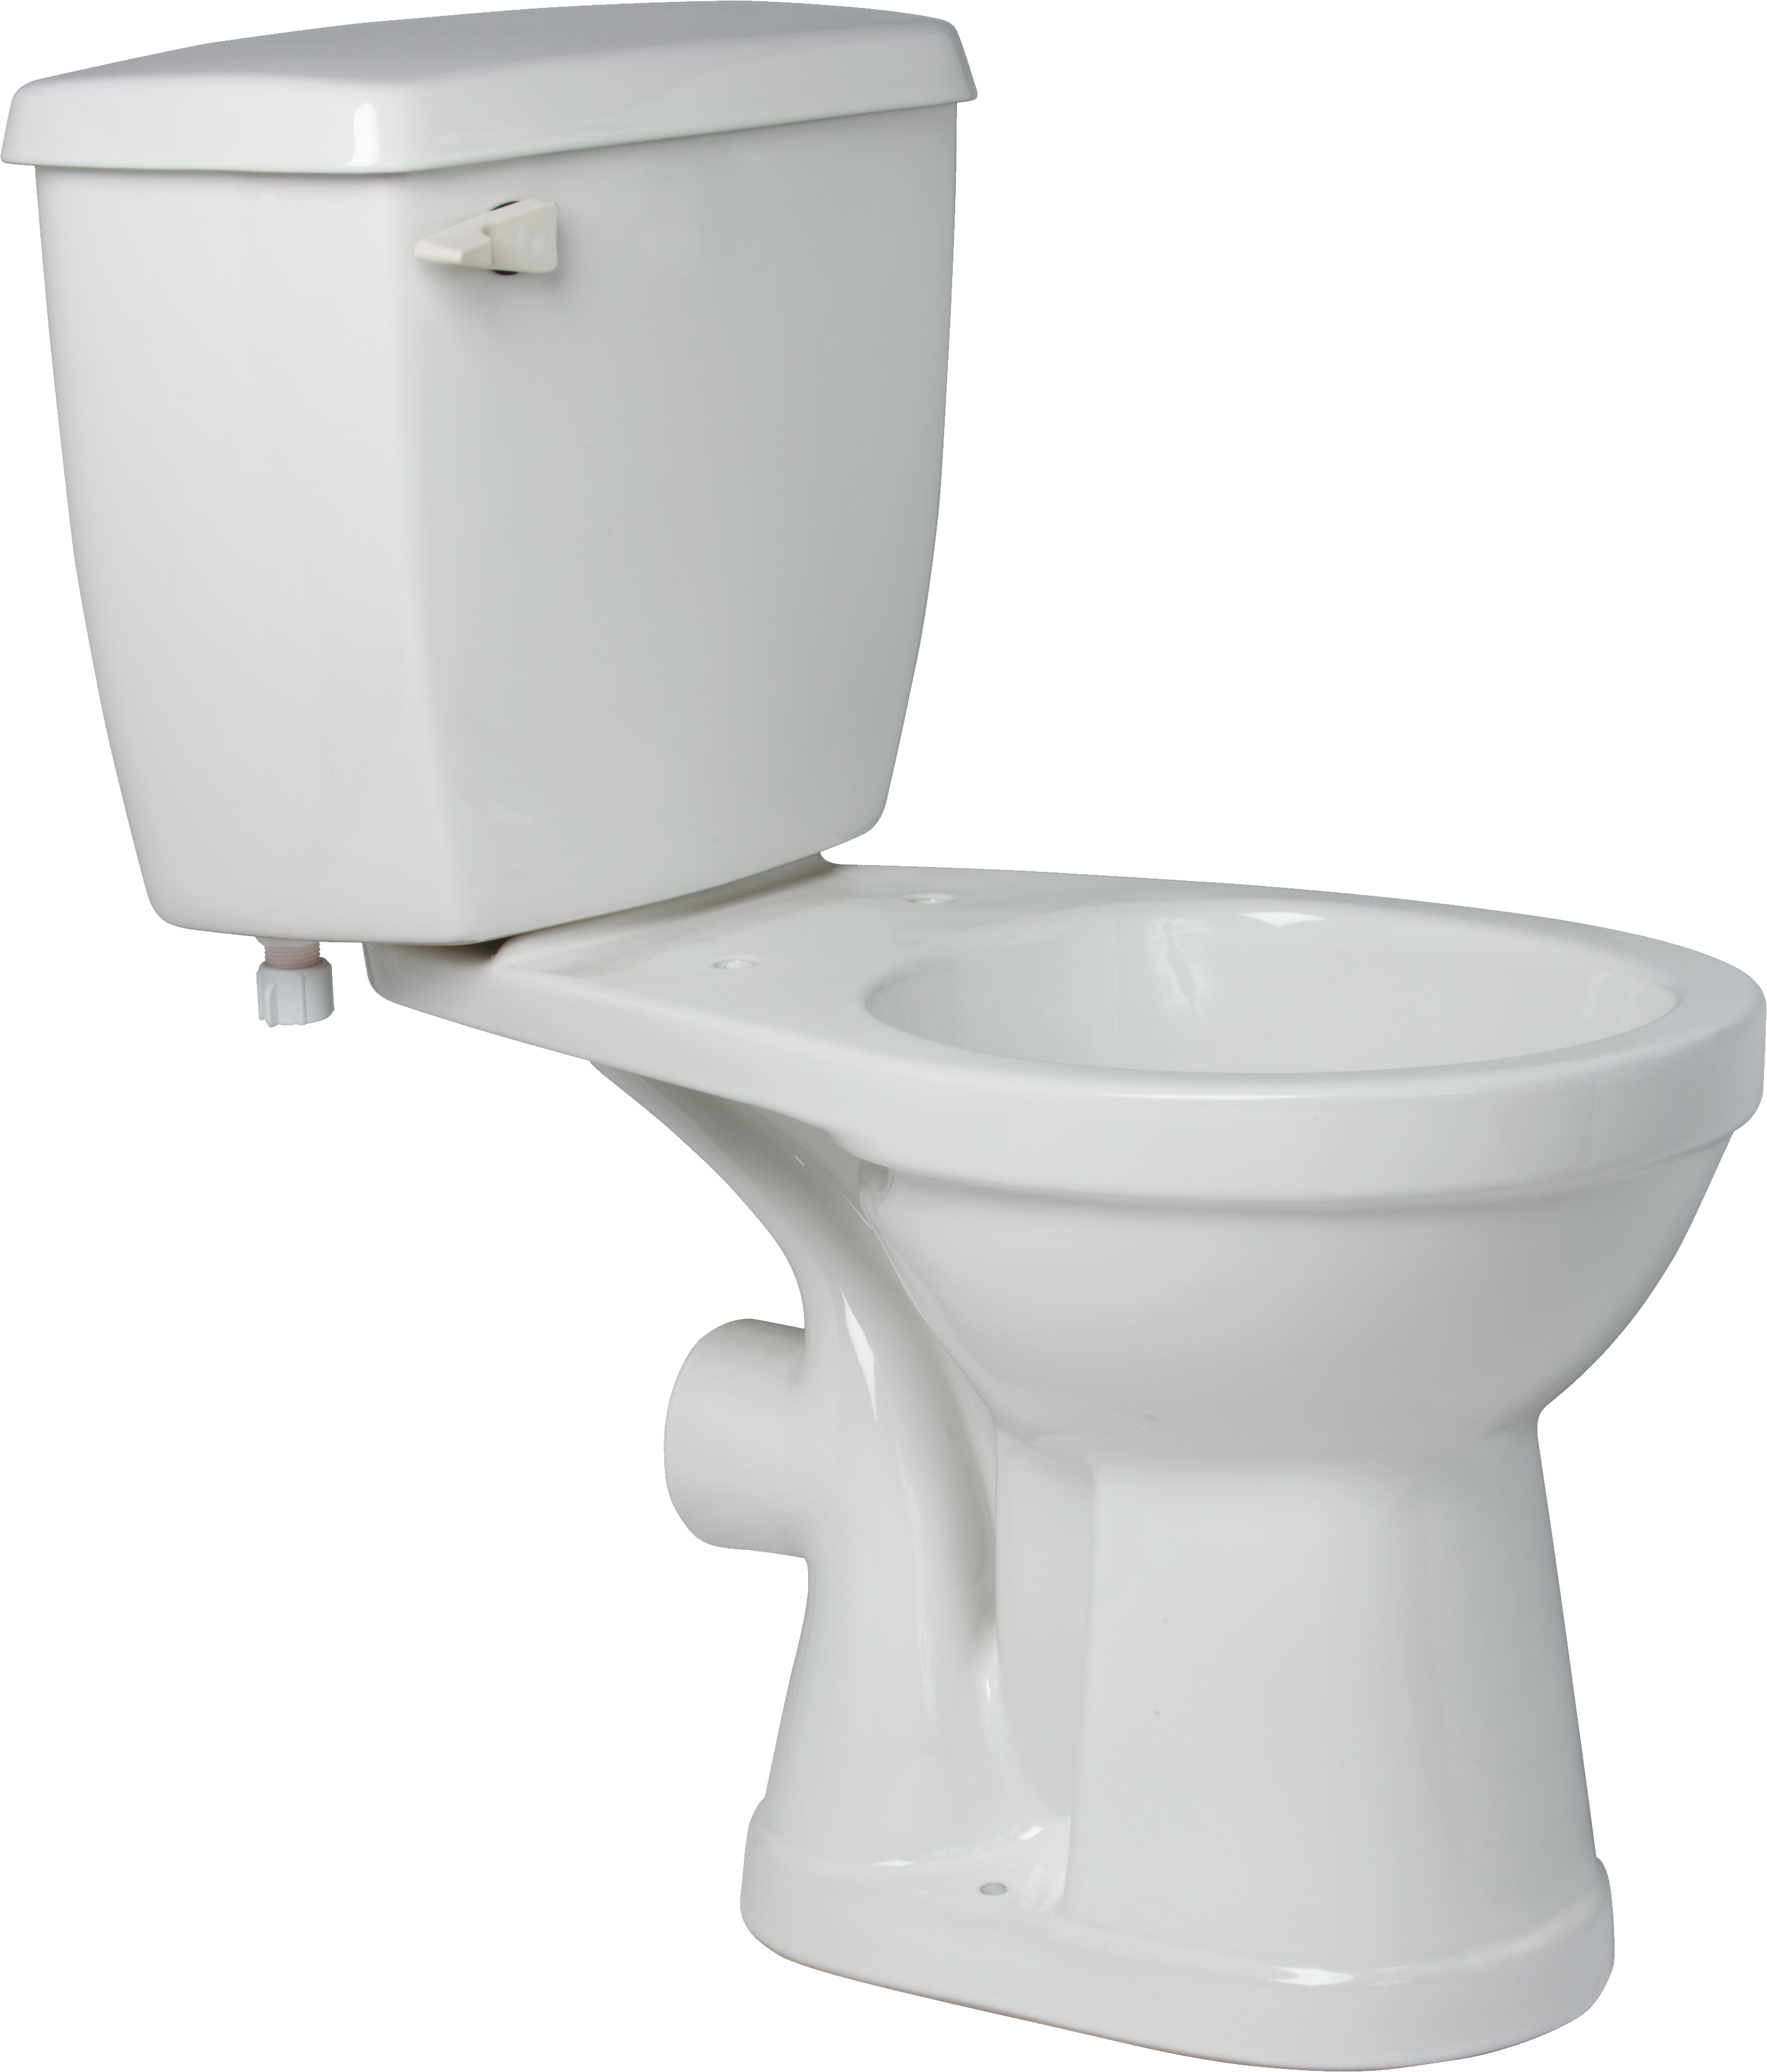 Toilet PNG images free download